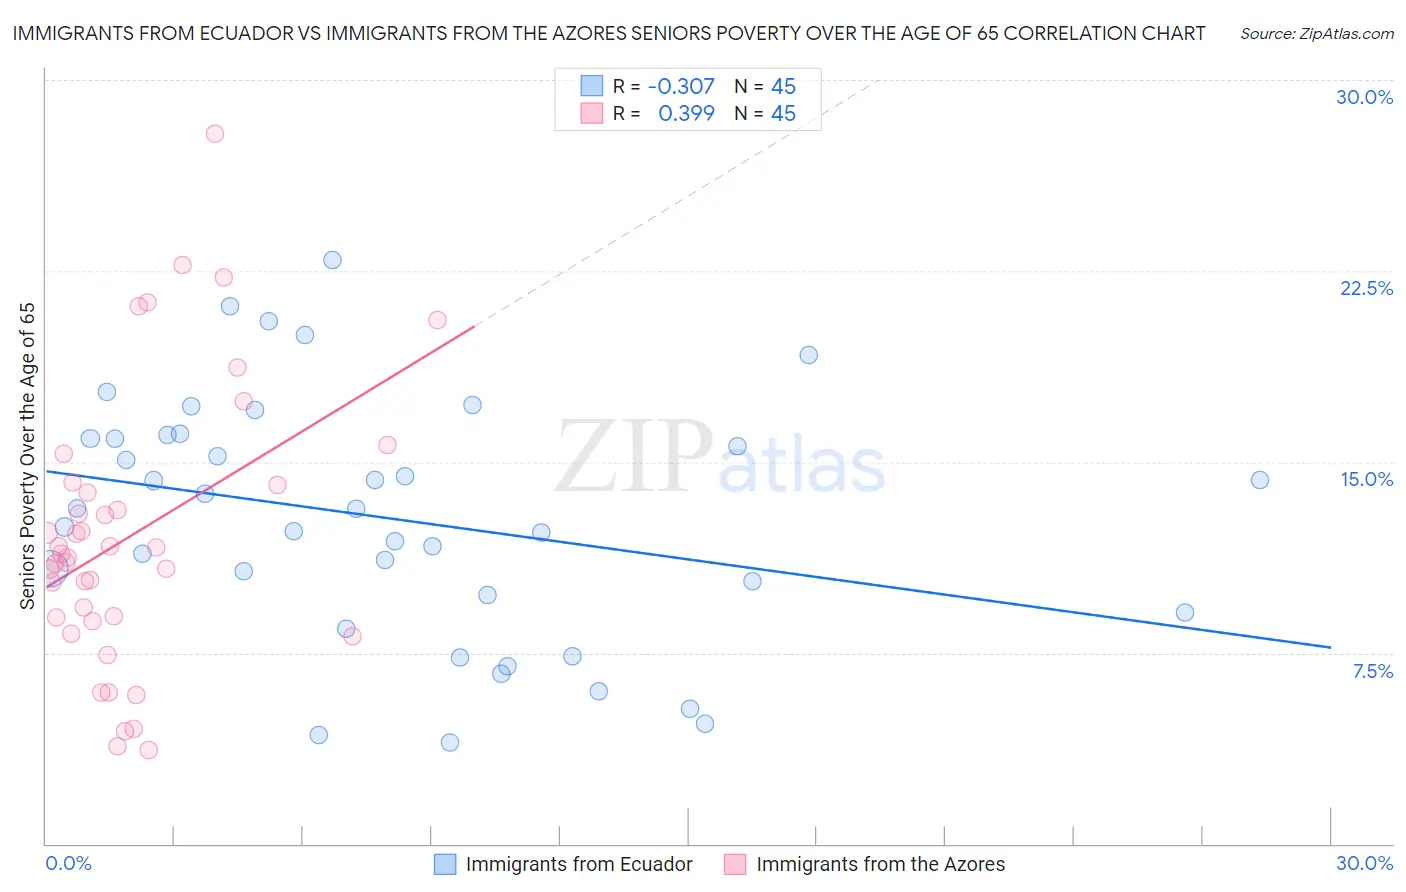 Immigrants from Ecuador vs Immigrants from the Azores Seniors Poverty Over the Age of 65